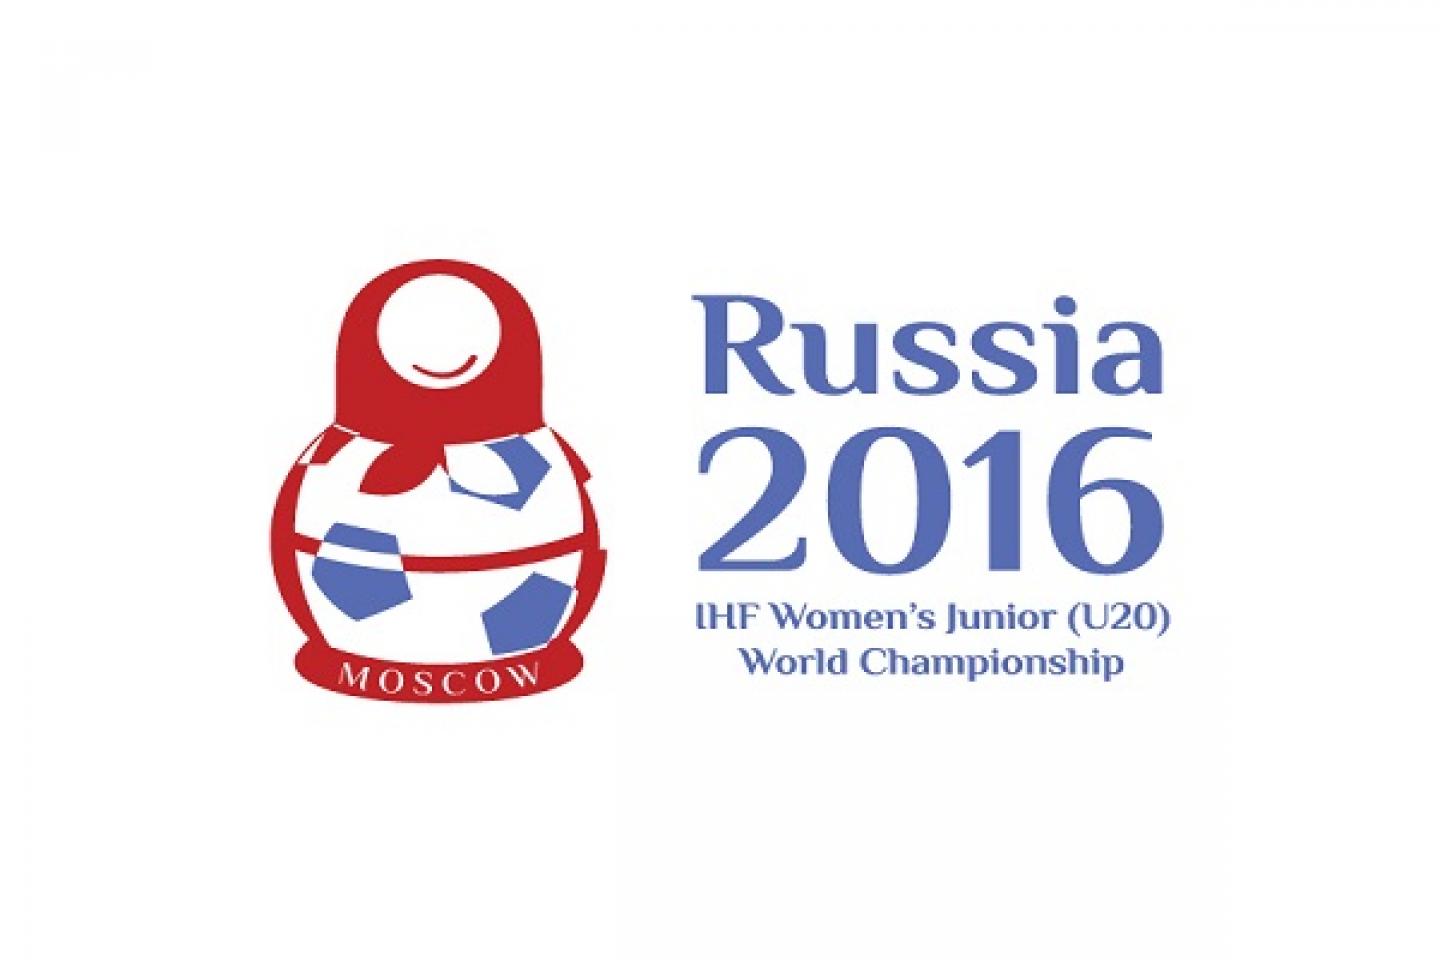 Match Schedule for Russia 2016 released